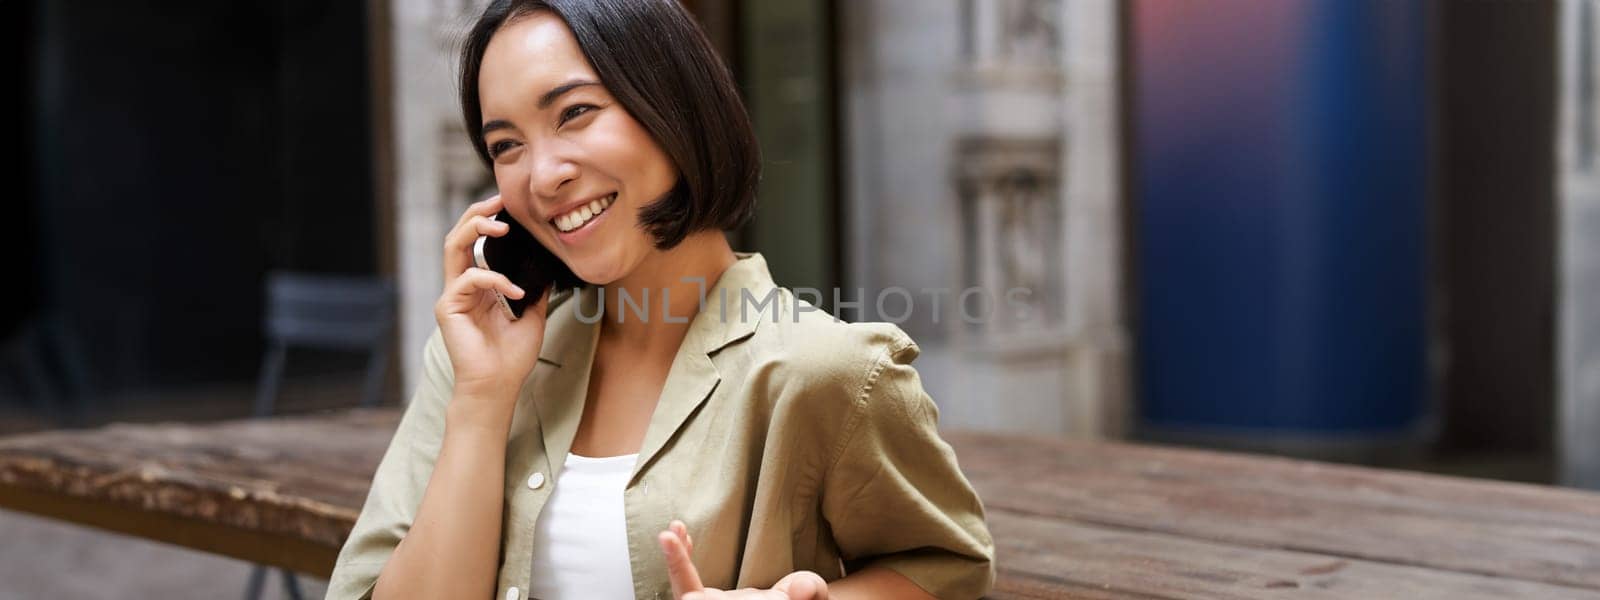 Young woman having conversation on mobile phone, sitting outdoors and making phone call, using smartphone, talking.